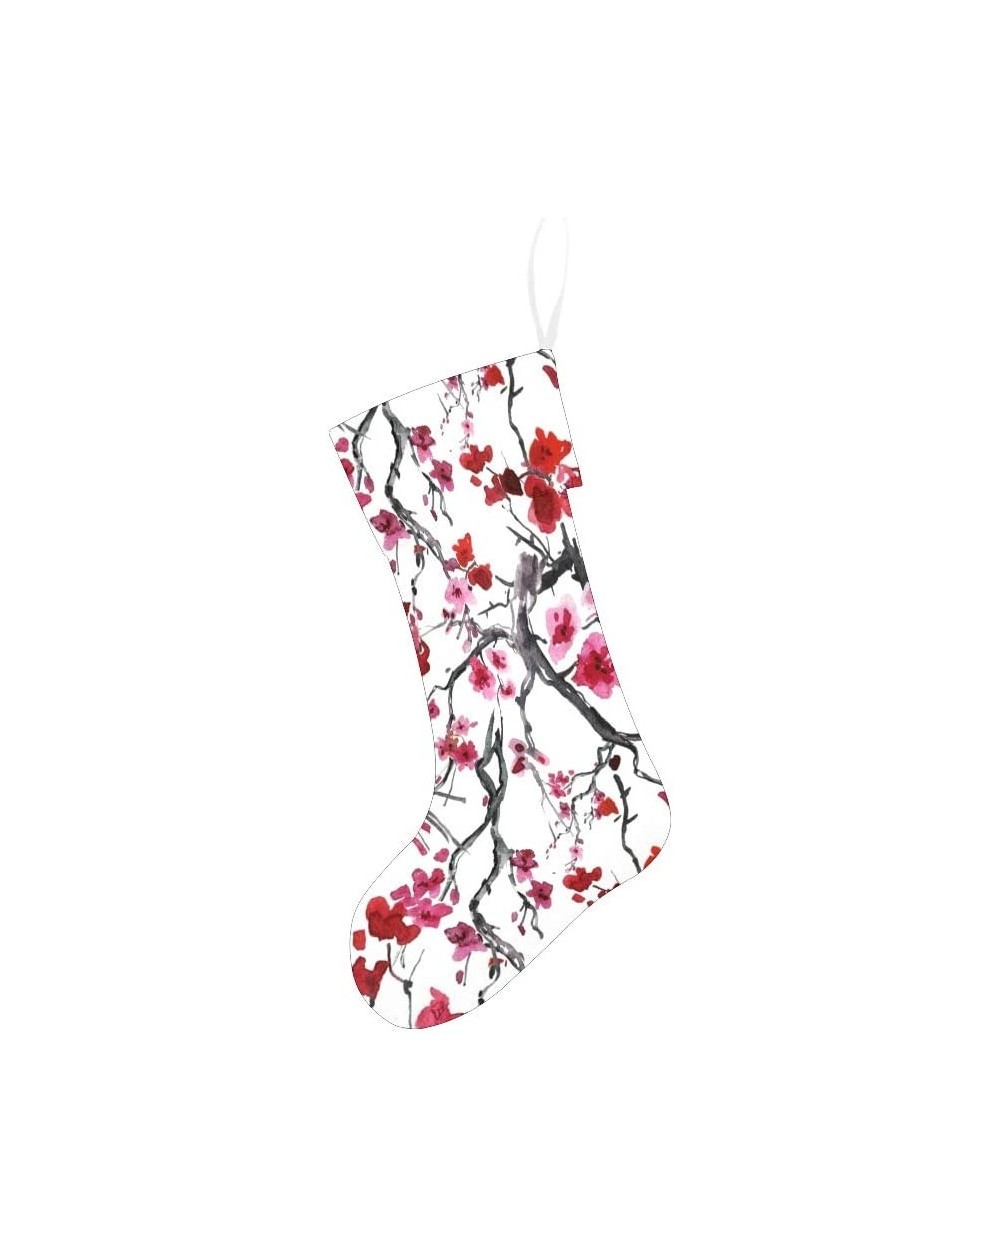 Stockings & Holders Cherry Blossom Christmas Stocking for Family Xmas Party Decoration Gift 17.52 x 7.87 Inch - Multi1 - CX19...